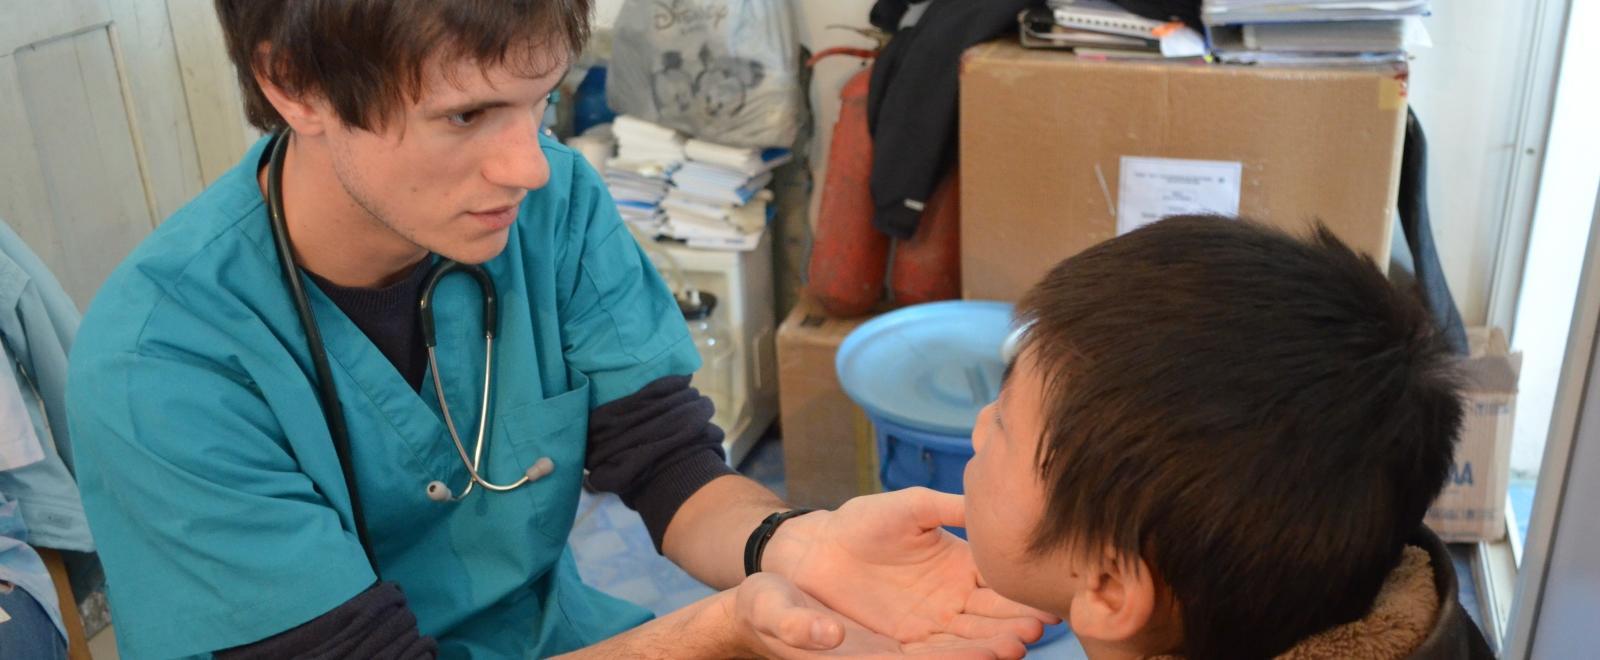 A Projects Abroad intern meets with a patient on our medical internship for teenagers in Mongolia